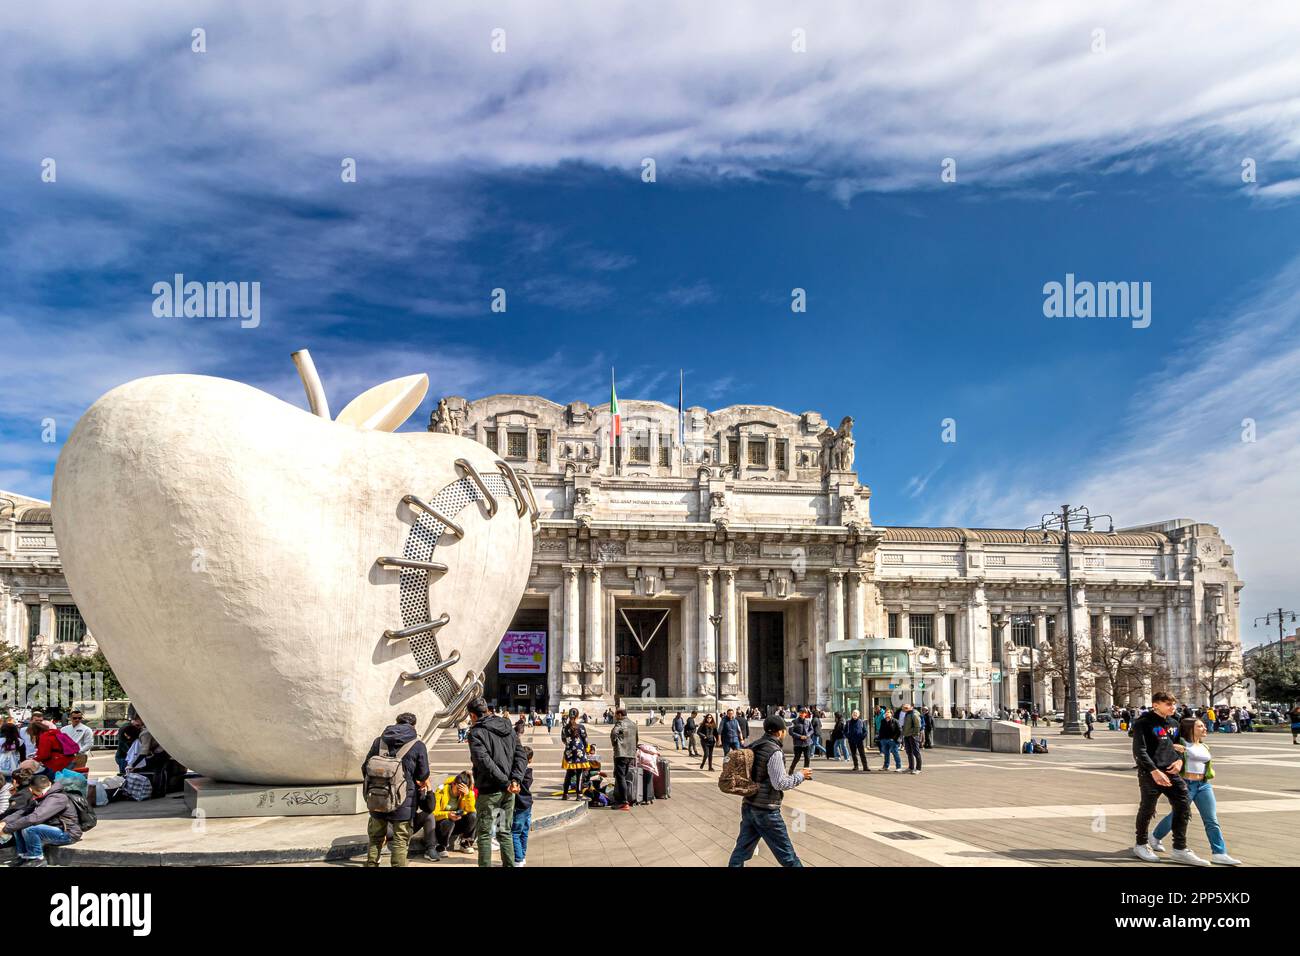 The big apple of Milan, a sculpture by Michelangelo Pistoletto, outside the grand exterior of  Milano Centrale railway station,Milan ,Italy Stock Photo